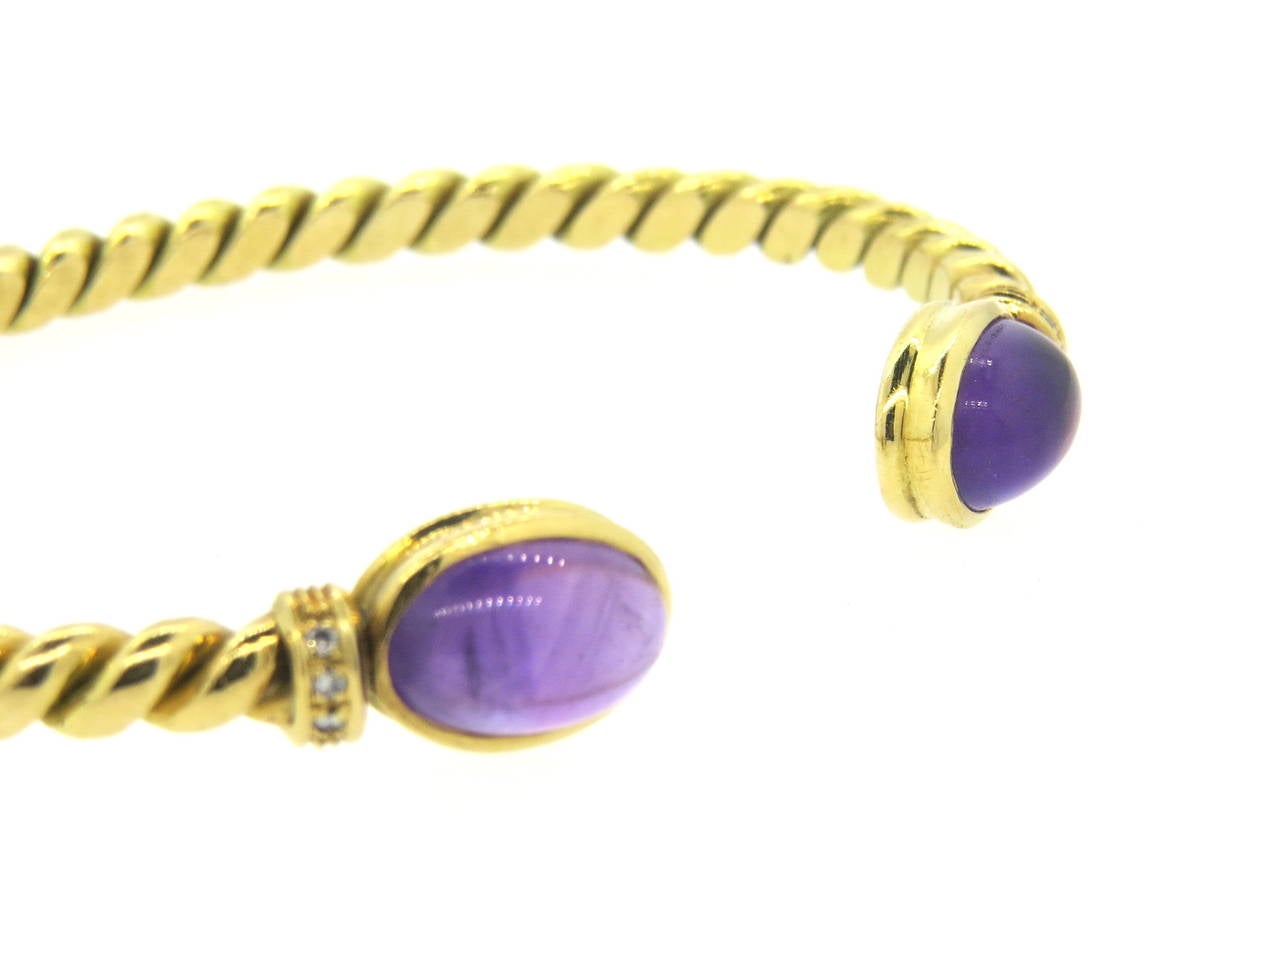 Vintage 1970s 18k gold cuff bracelet, decorated with diamonds and 11.8mm x 8mm amethyst cabochons. Bracelet will fit up to 7 1/2